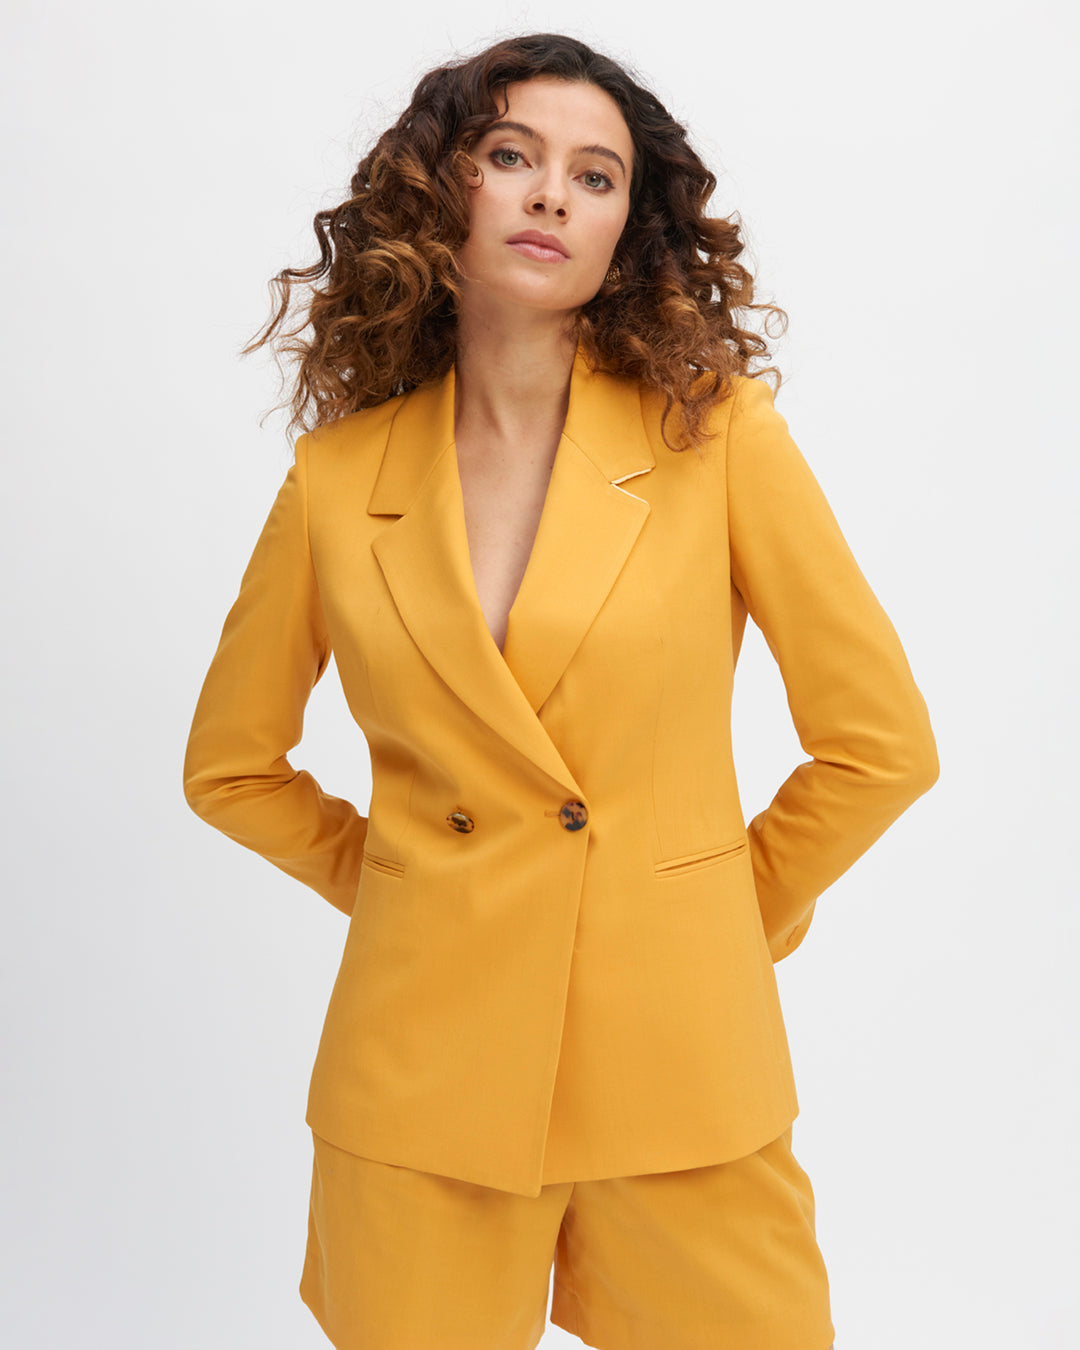 Long-sleeved jacket-yellow-cropped-and-curved-sleeved-collar-detachable-belt-toned-on-toned-two-short-slits-on-the-back-for-a-pretty-tumble